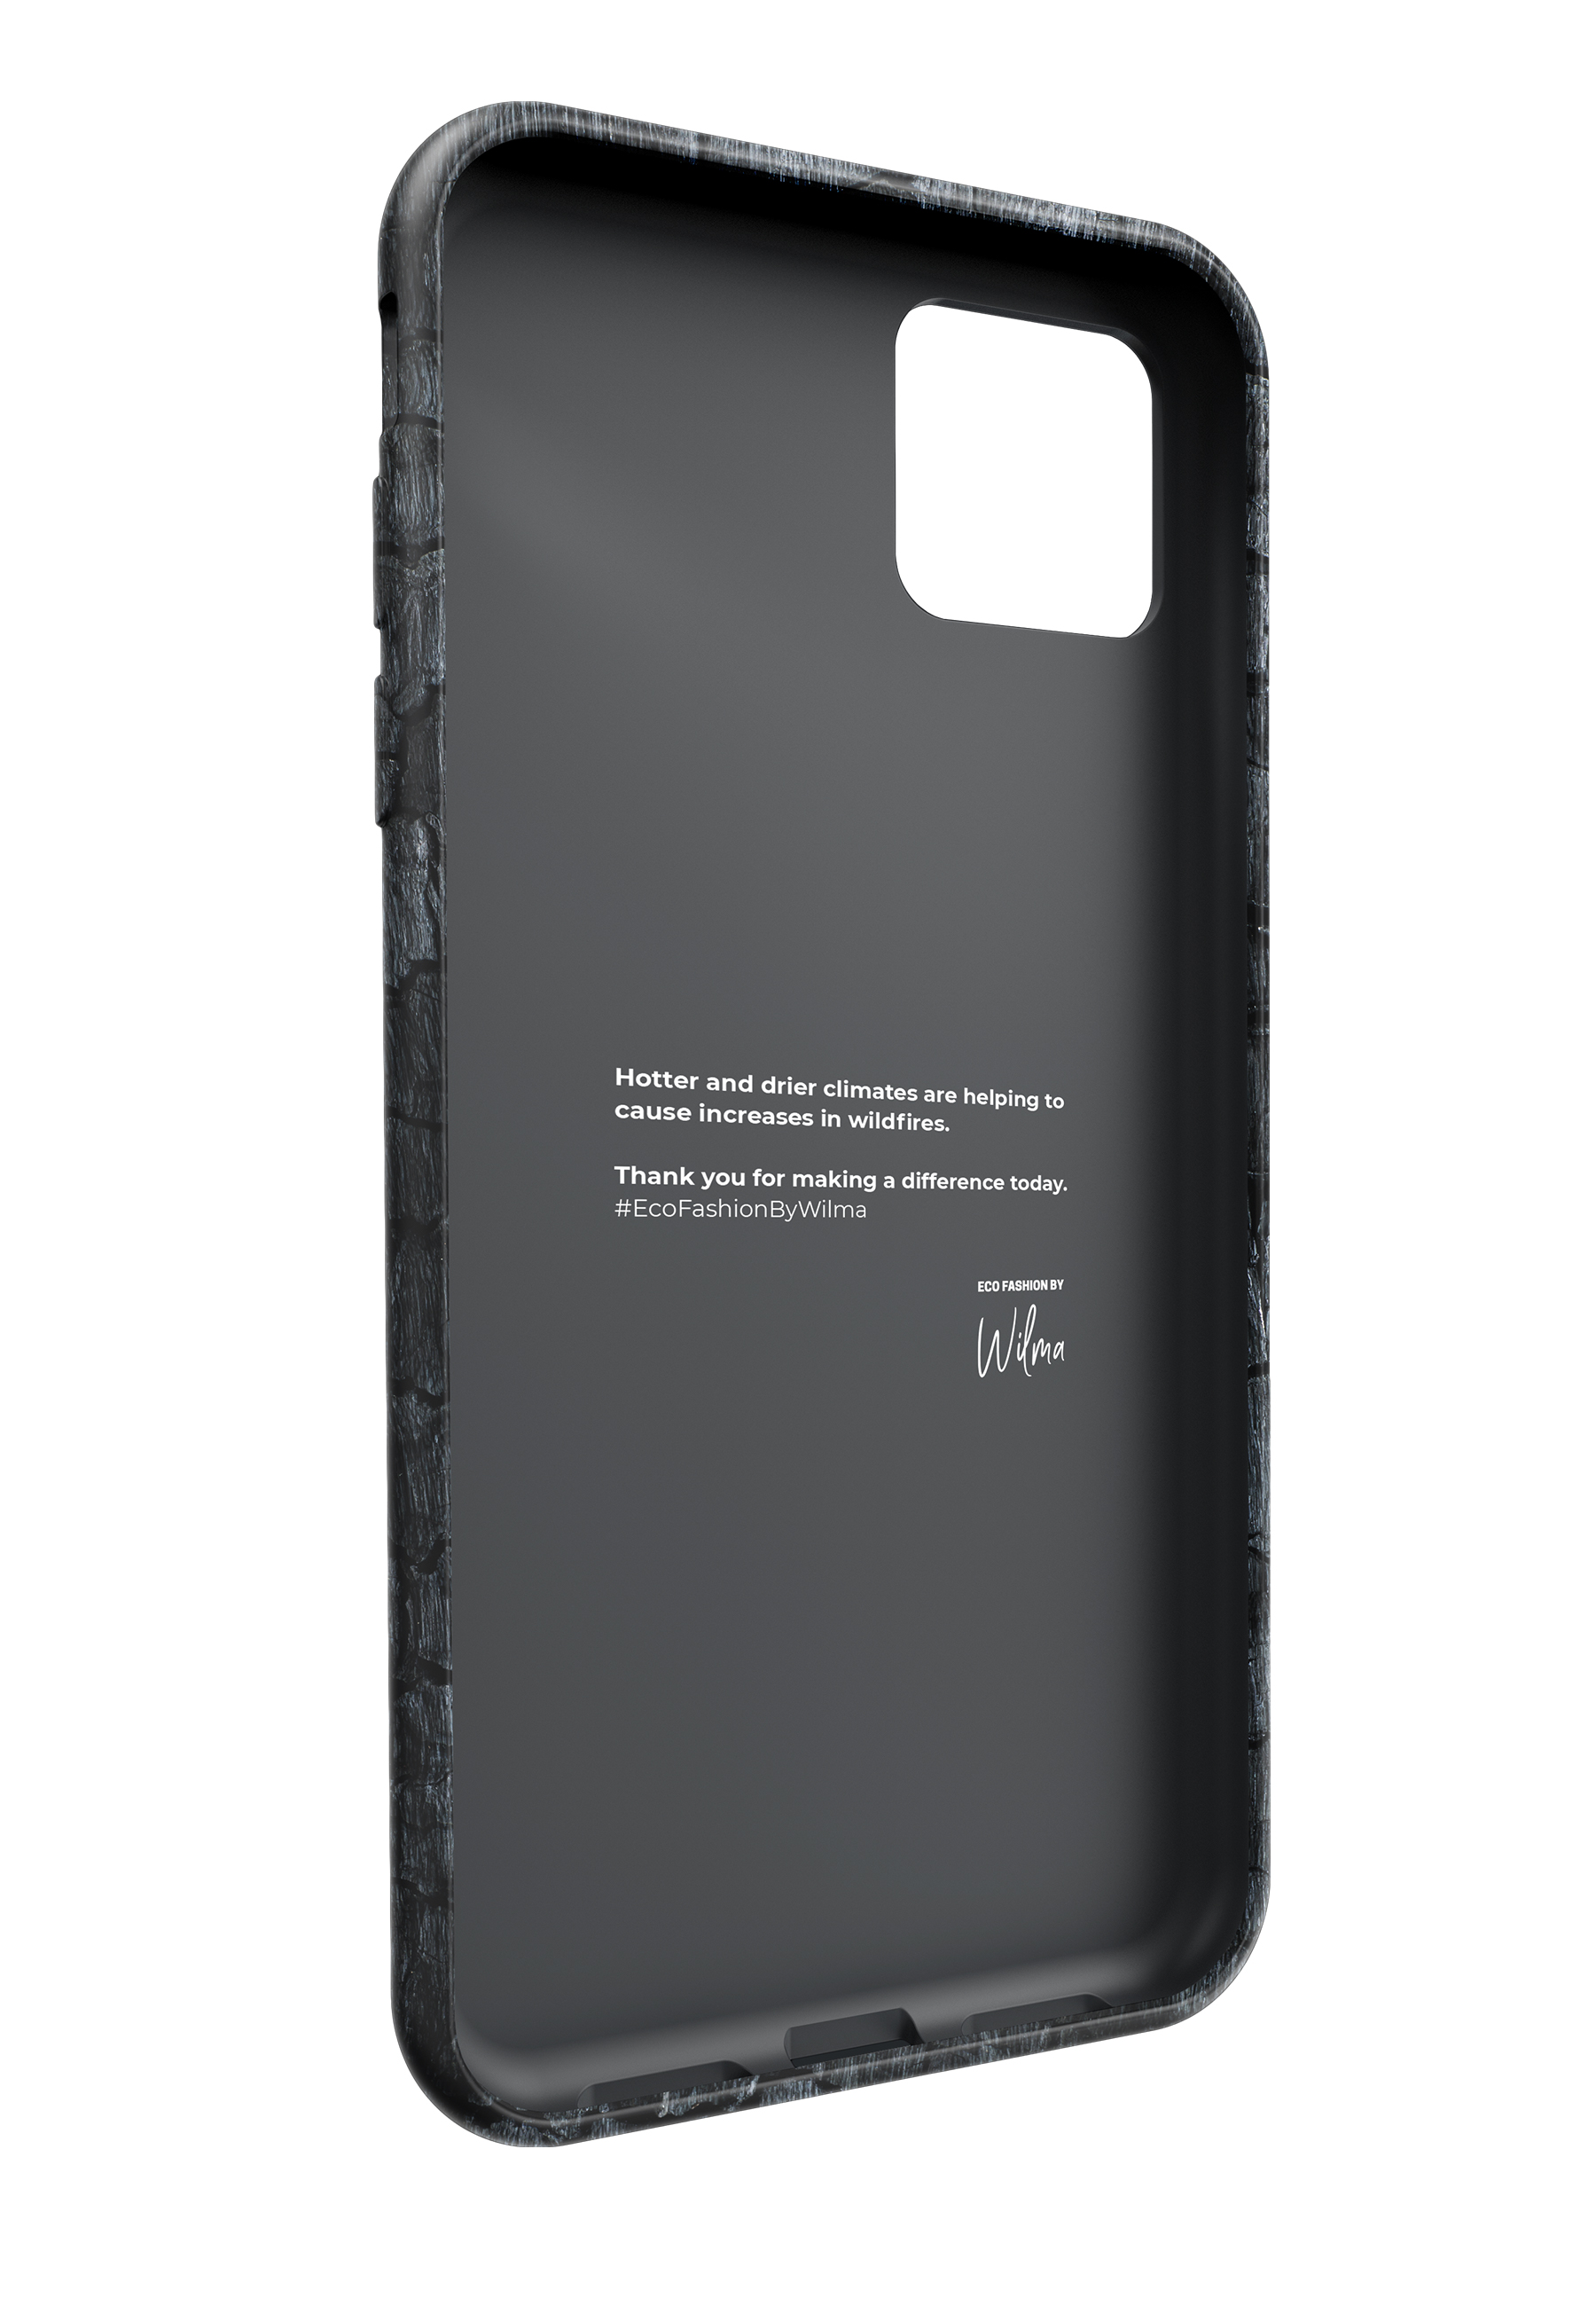 Pro Backcover, 12 Apple, Max, P12PM, BY WILMA ECO iPhone black FASHION